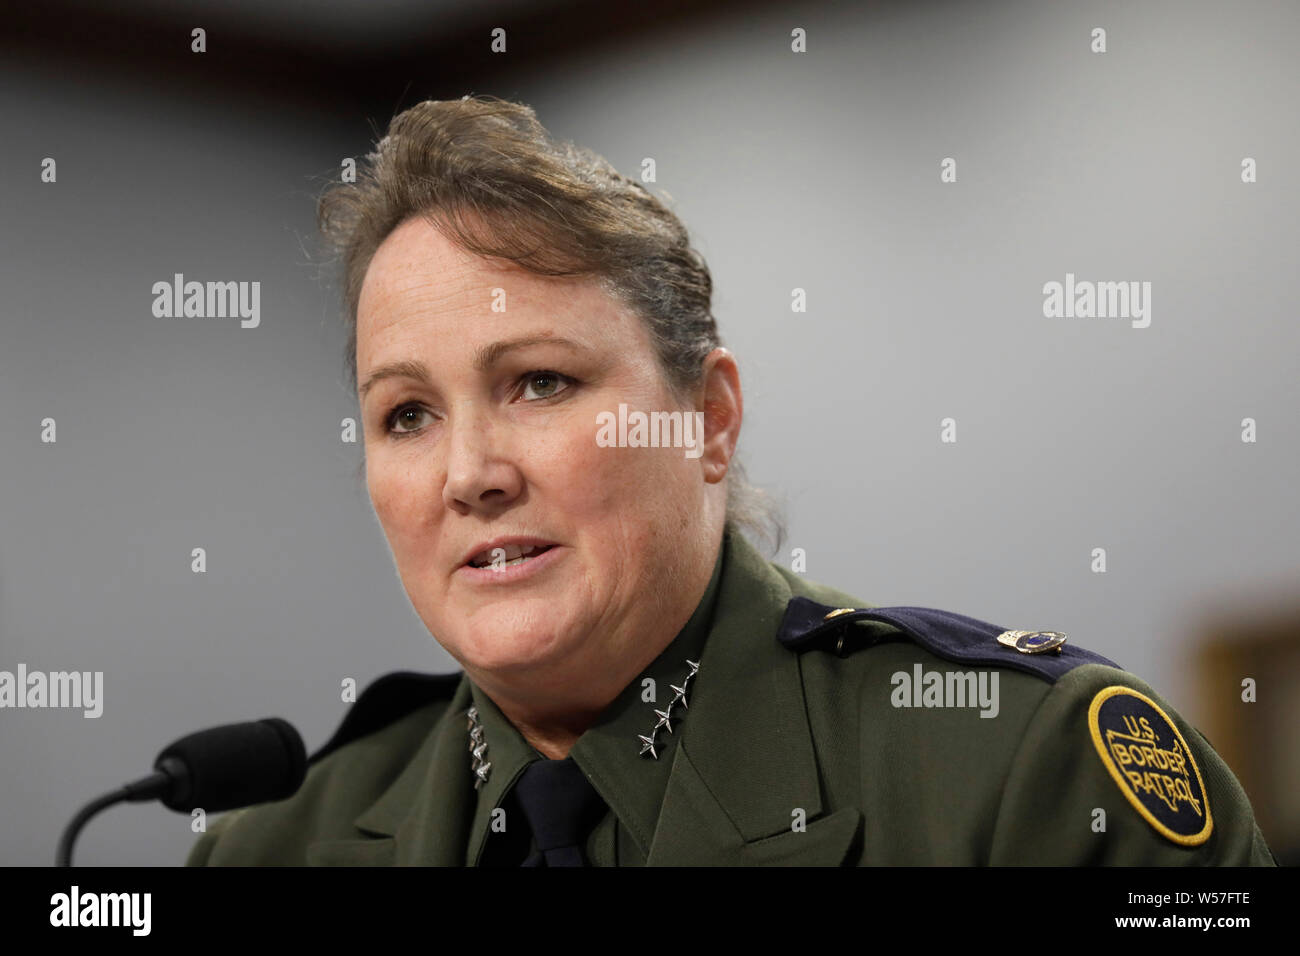 Chief of the U.S. Border Patrol Carla Provost testifies before the House Committee on Appropriations during a Border Patrol Oversight hearing on Capitol Hill July 24, 2019 in Washington, D.C. Stock Photo